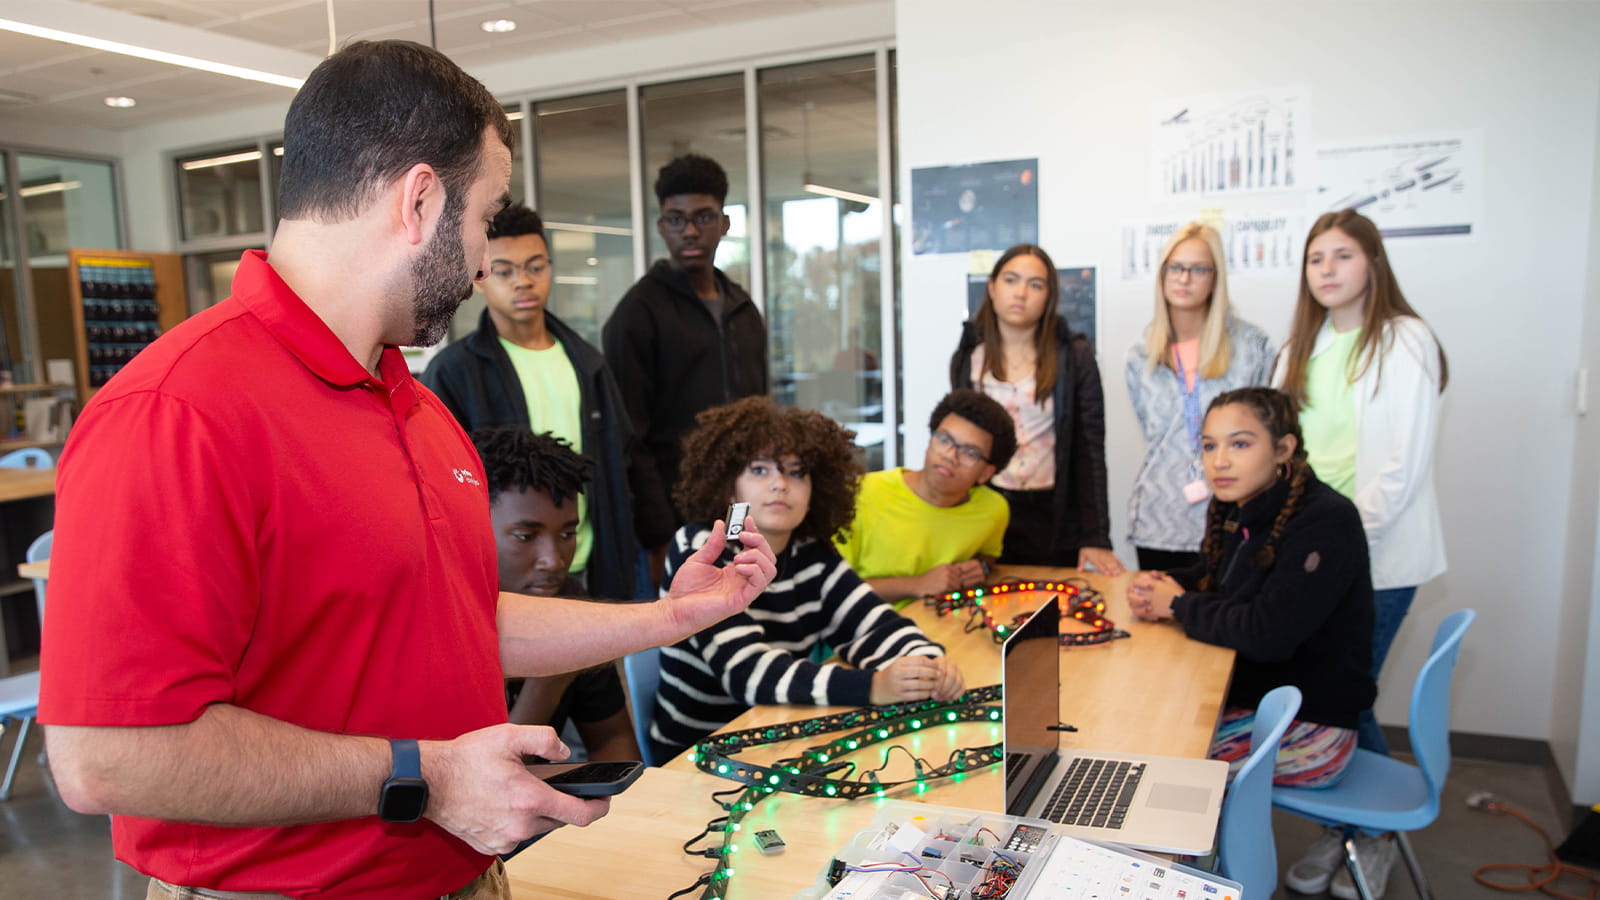 A man in a red shirt shows a microcontroller to a group of nine students gathered around a table in a classroom. A string of green and red LED lights lies on the table, next to a laptop computer and a container of various electronics parts.